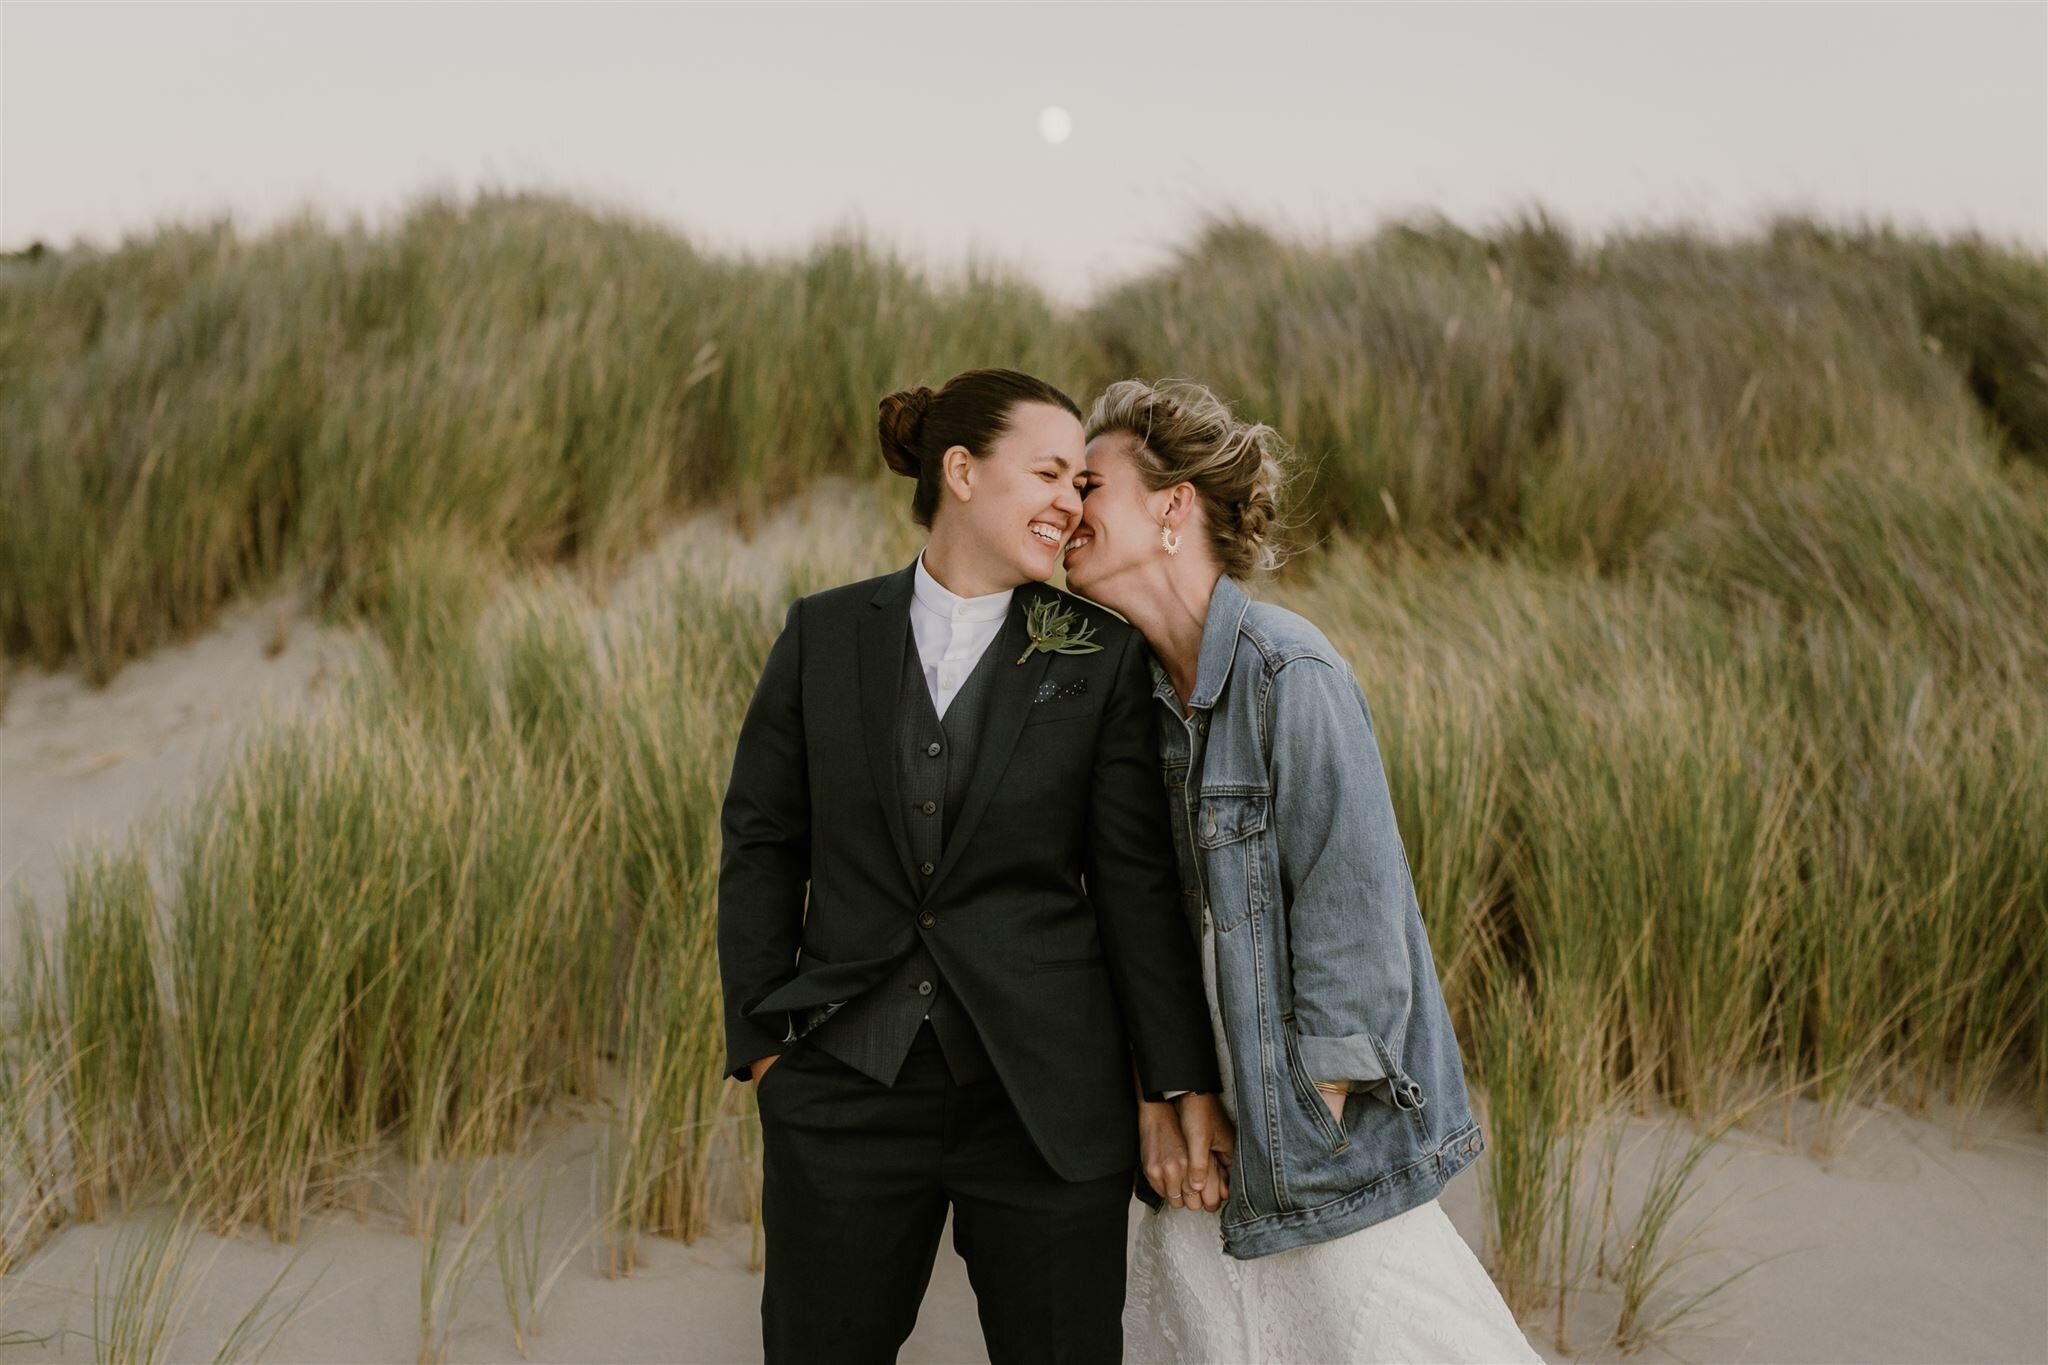  Real wedding on the Oregon coast with Amy and Danielle in the Rish Rio wedding dress by Catalina Jean Photography 